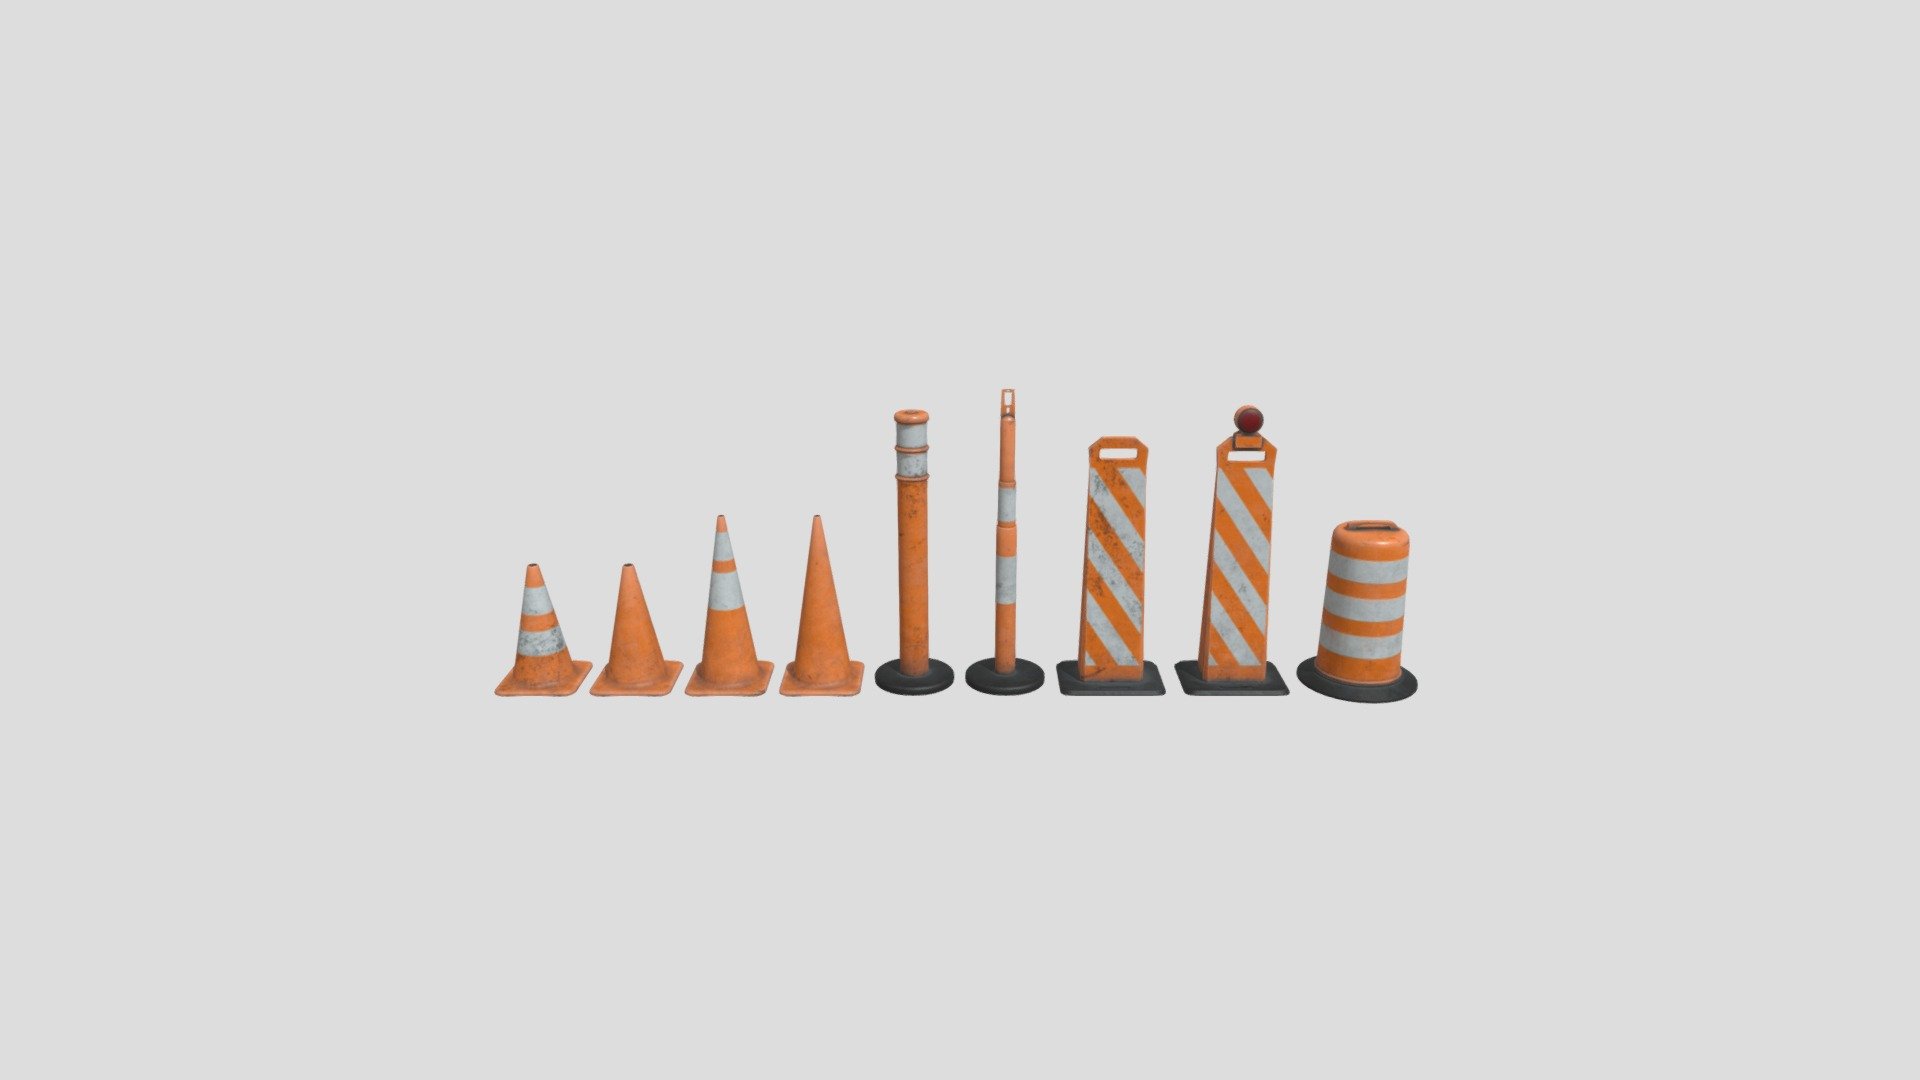 This Traffic Cone kit contains the following:

4 Small Cones
2 Tall Skinny Cones
2 Tall Square Cones
1 Large Cones
-Small cone 4k Textures -Large cone 4k Textures

The following models are UV unwrapped with according vertex colors for future texturing if that interests you 3d model